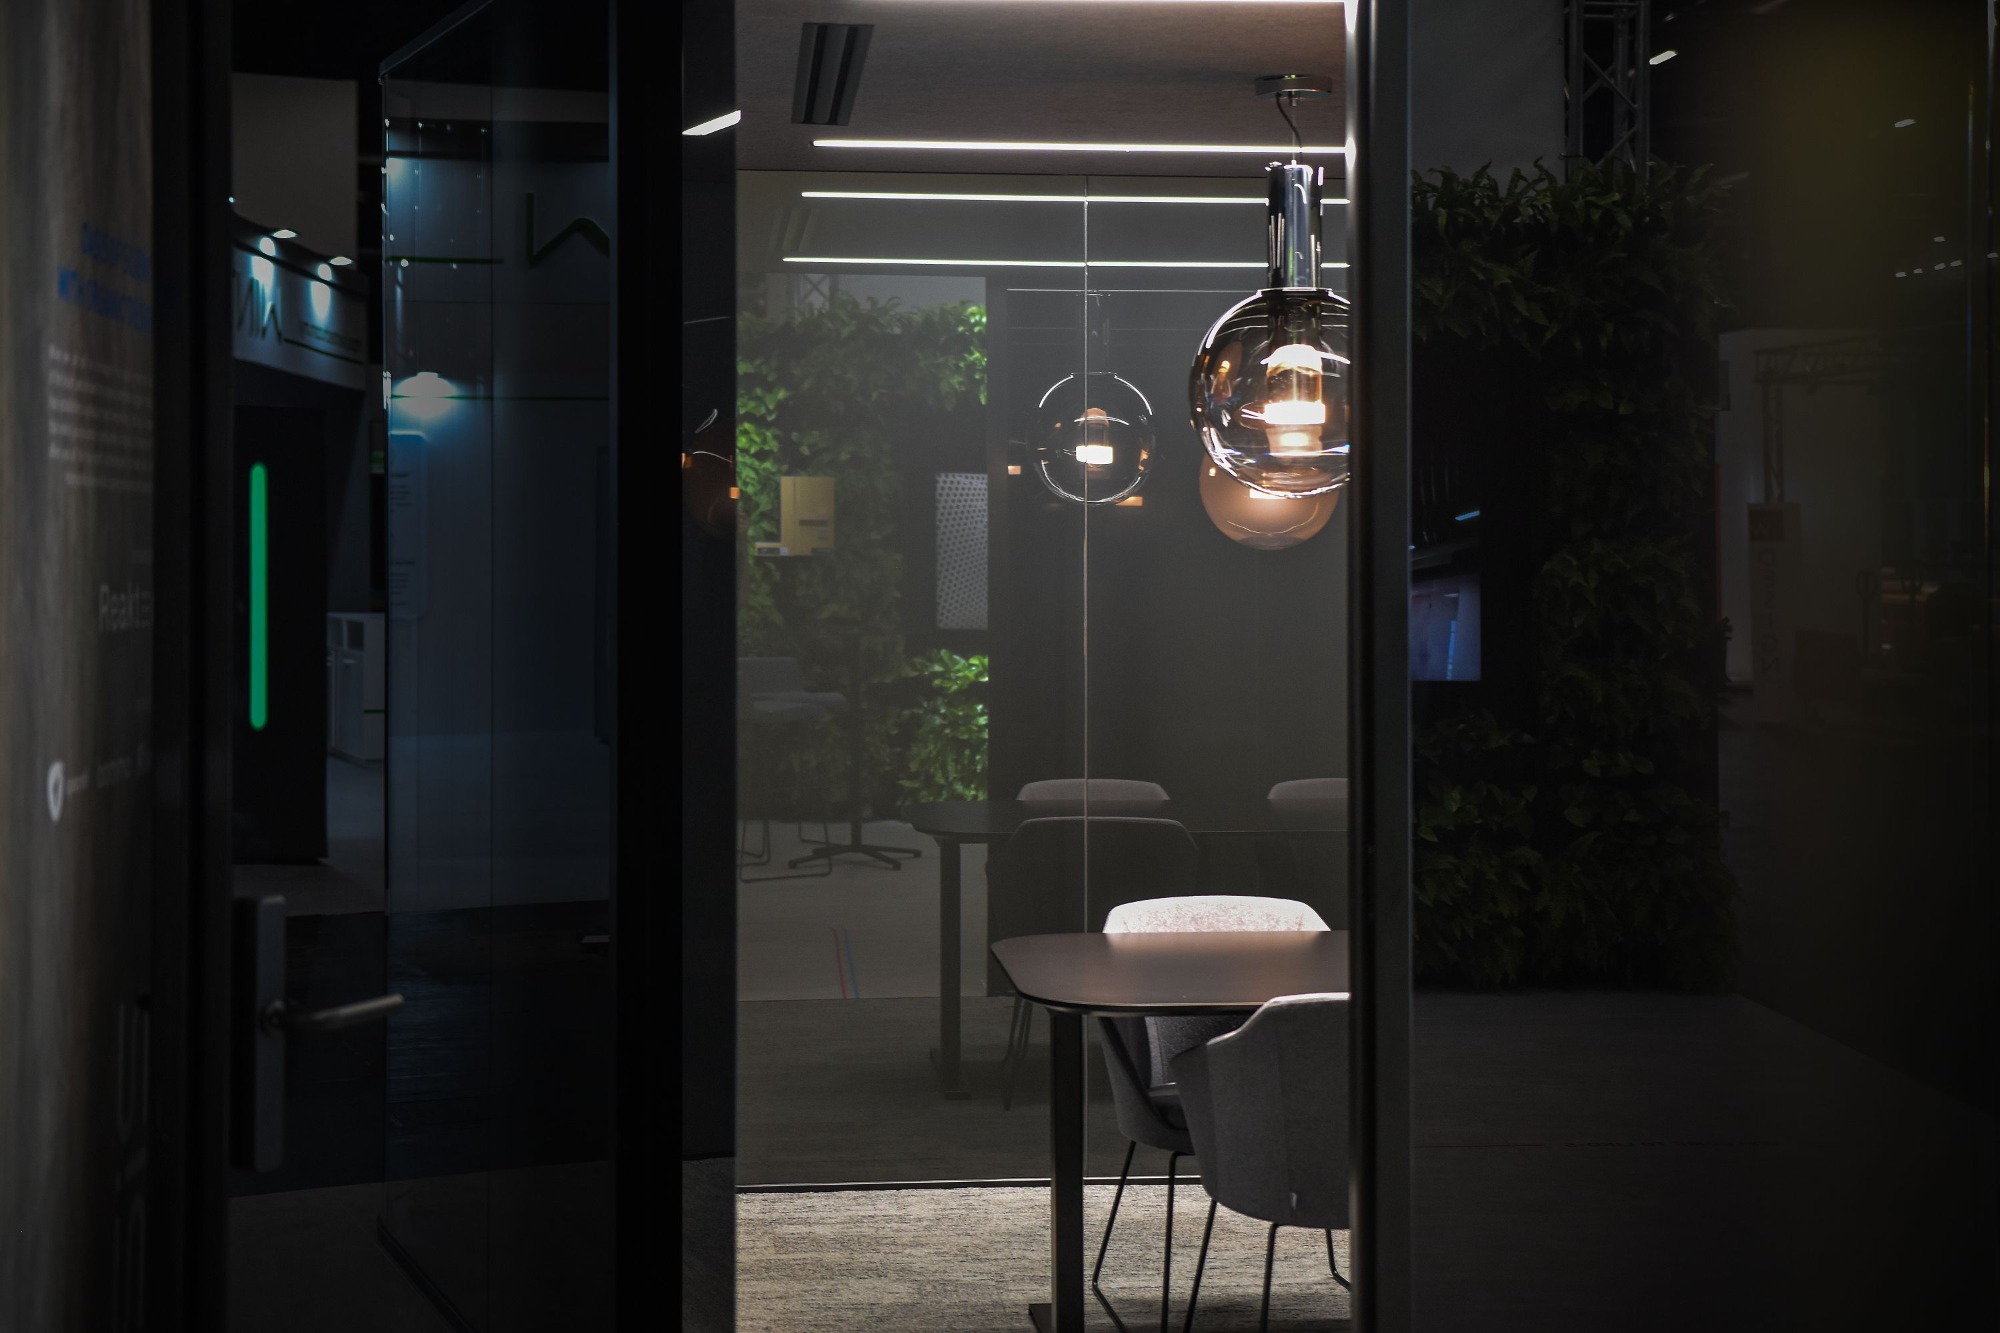 We have presented the world's first smart all-glass meeting room